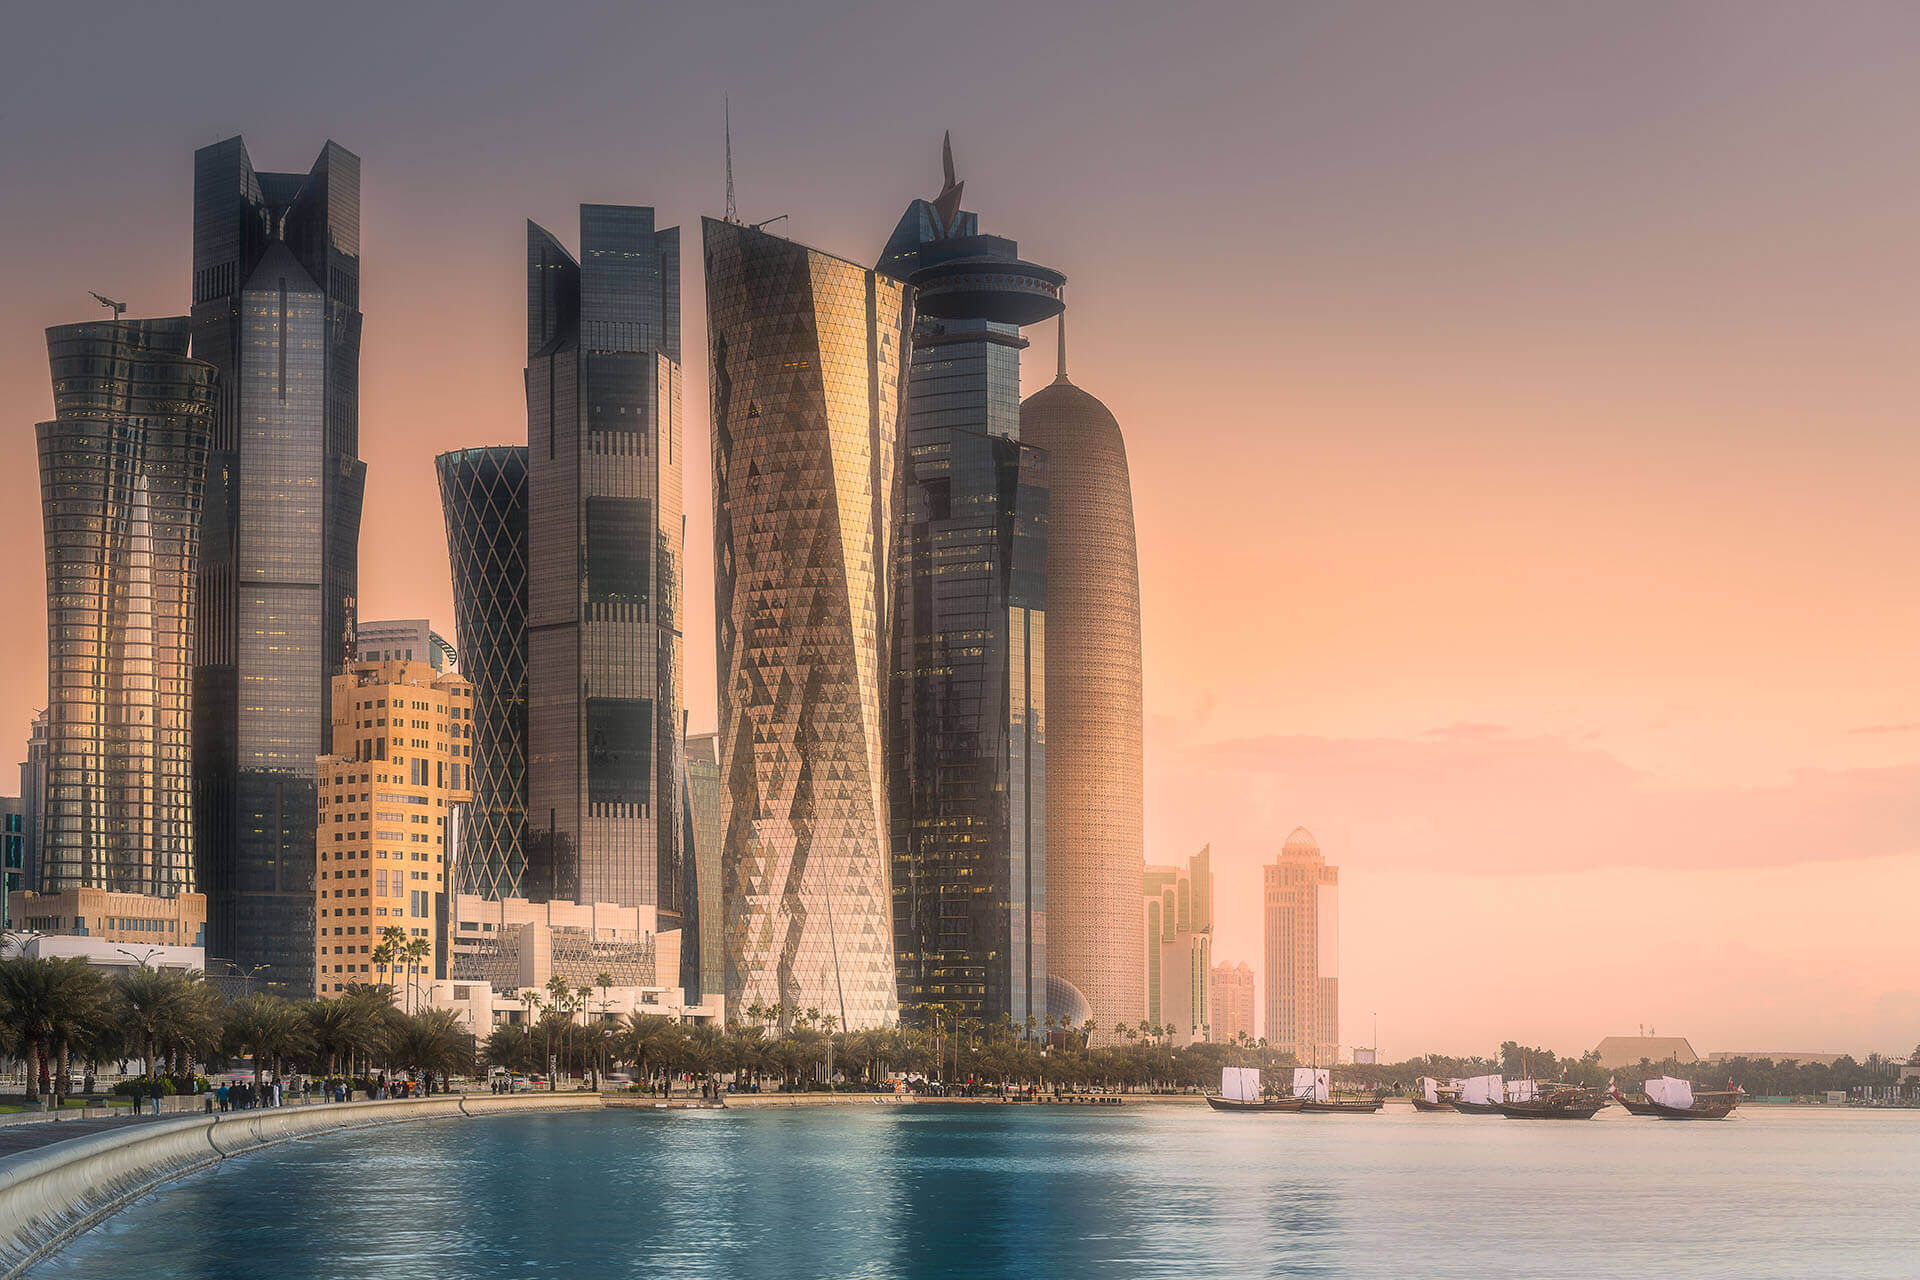 Qatar: Government Updates COVID-19 Travel and Return Policy